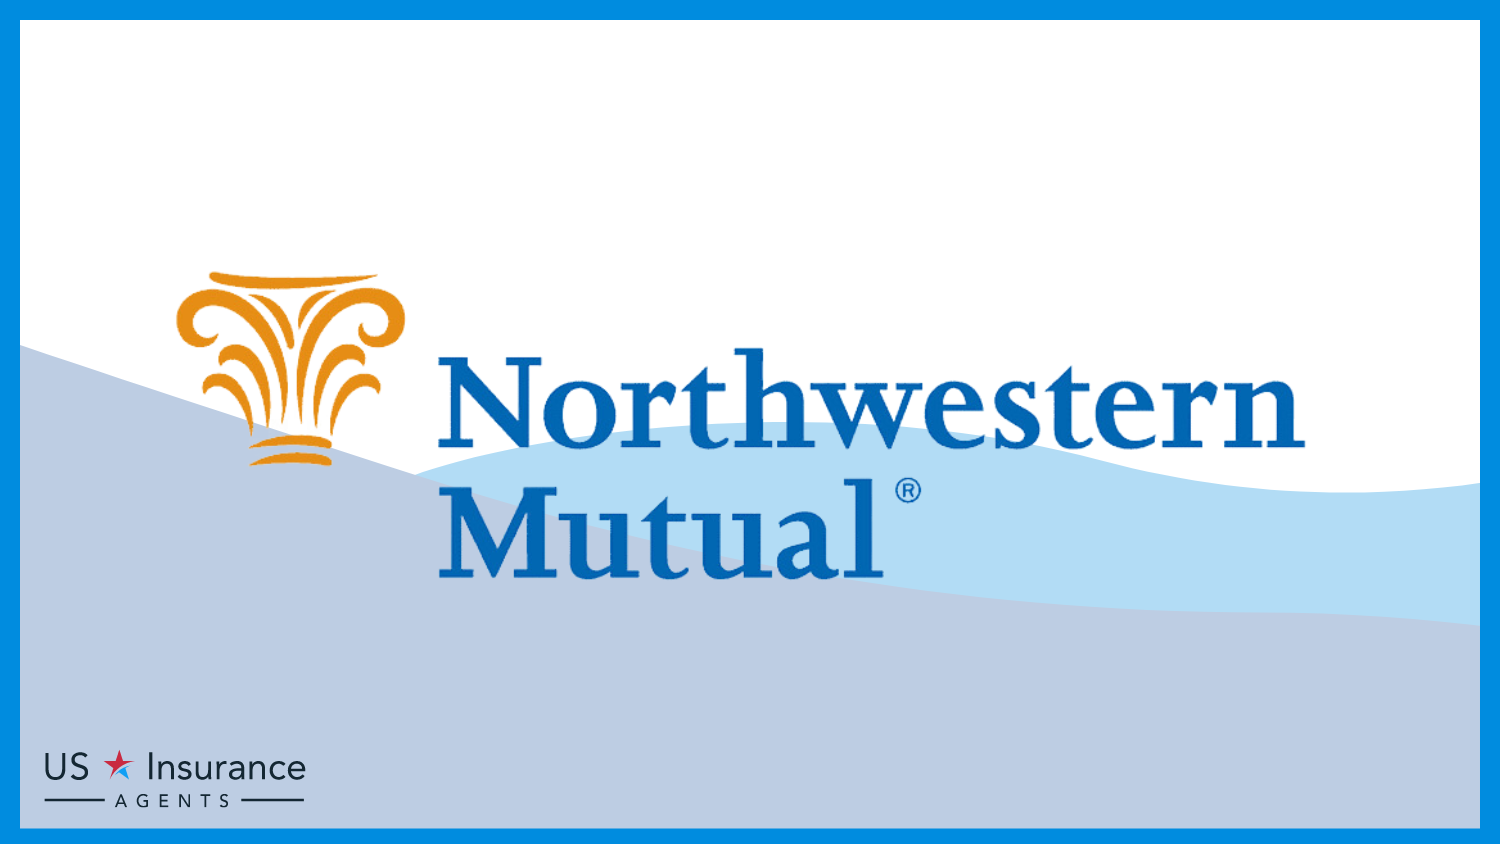 Best Life Insurance for a Child's Father: Northwestern Mutual